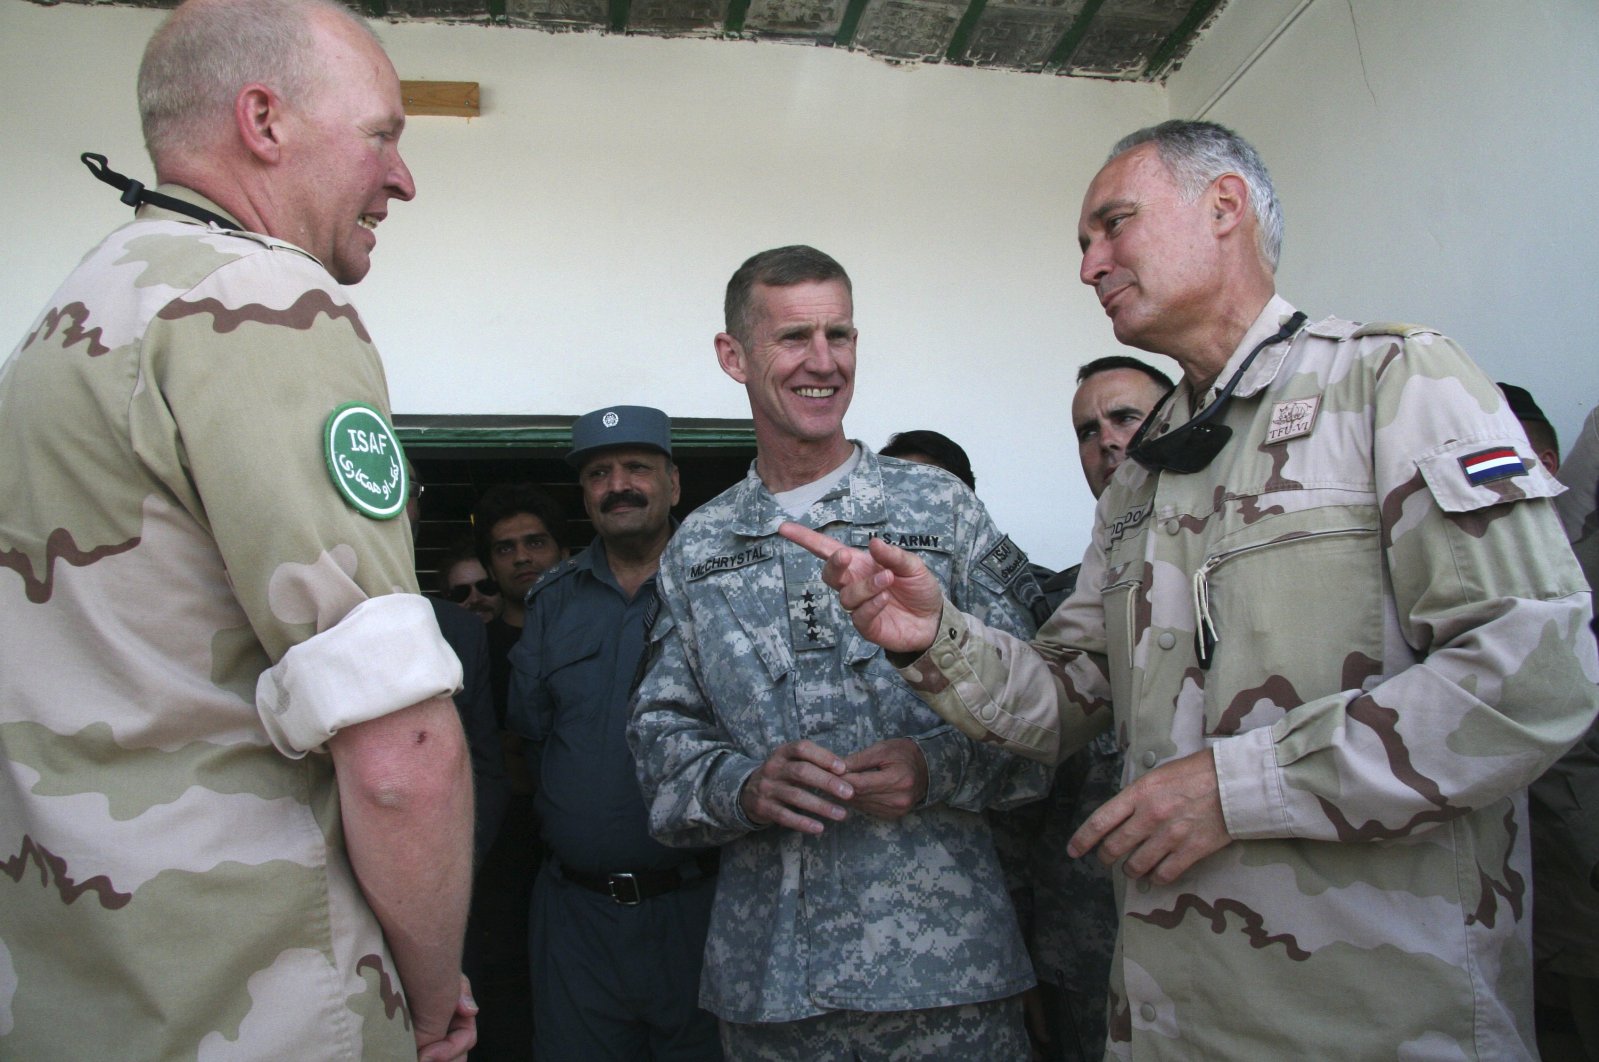 Head of the Dutch troops in Uruzgan province, Brig. Gen. T. A. Middendorp (R) listens to Gen. Stanley McChrystal, the head of U.S. and NATO forces in Afghanistan and an unidentified officer (L) in Dund, in Afghanistan's southern province of Kandahar. June 25, 2009 (AP Photo)